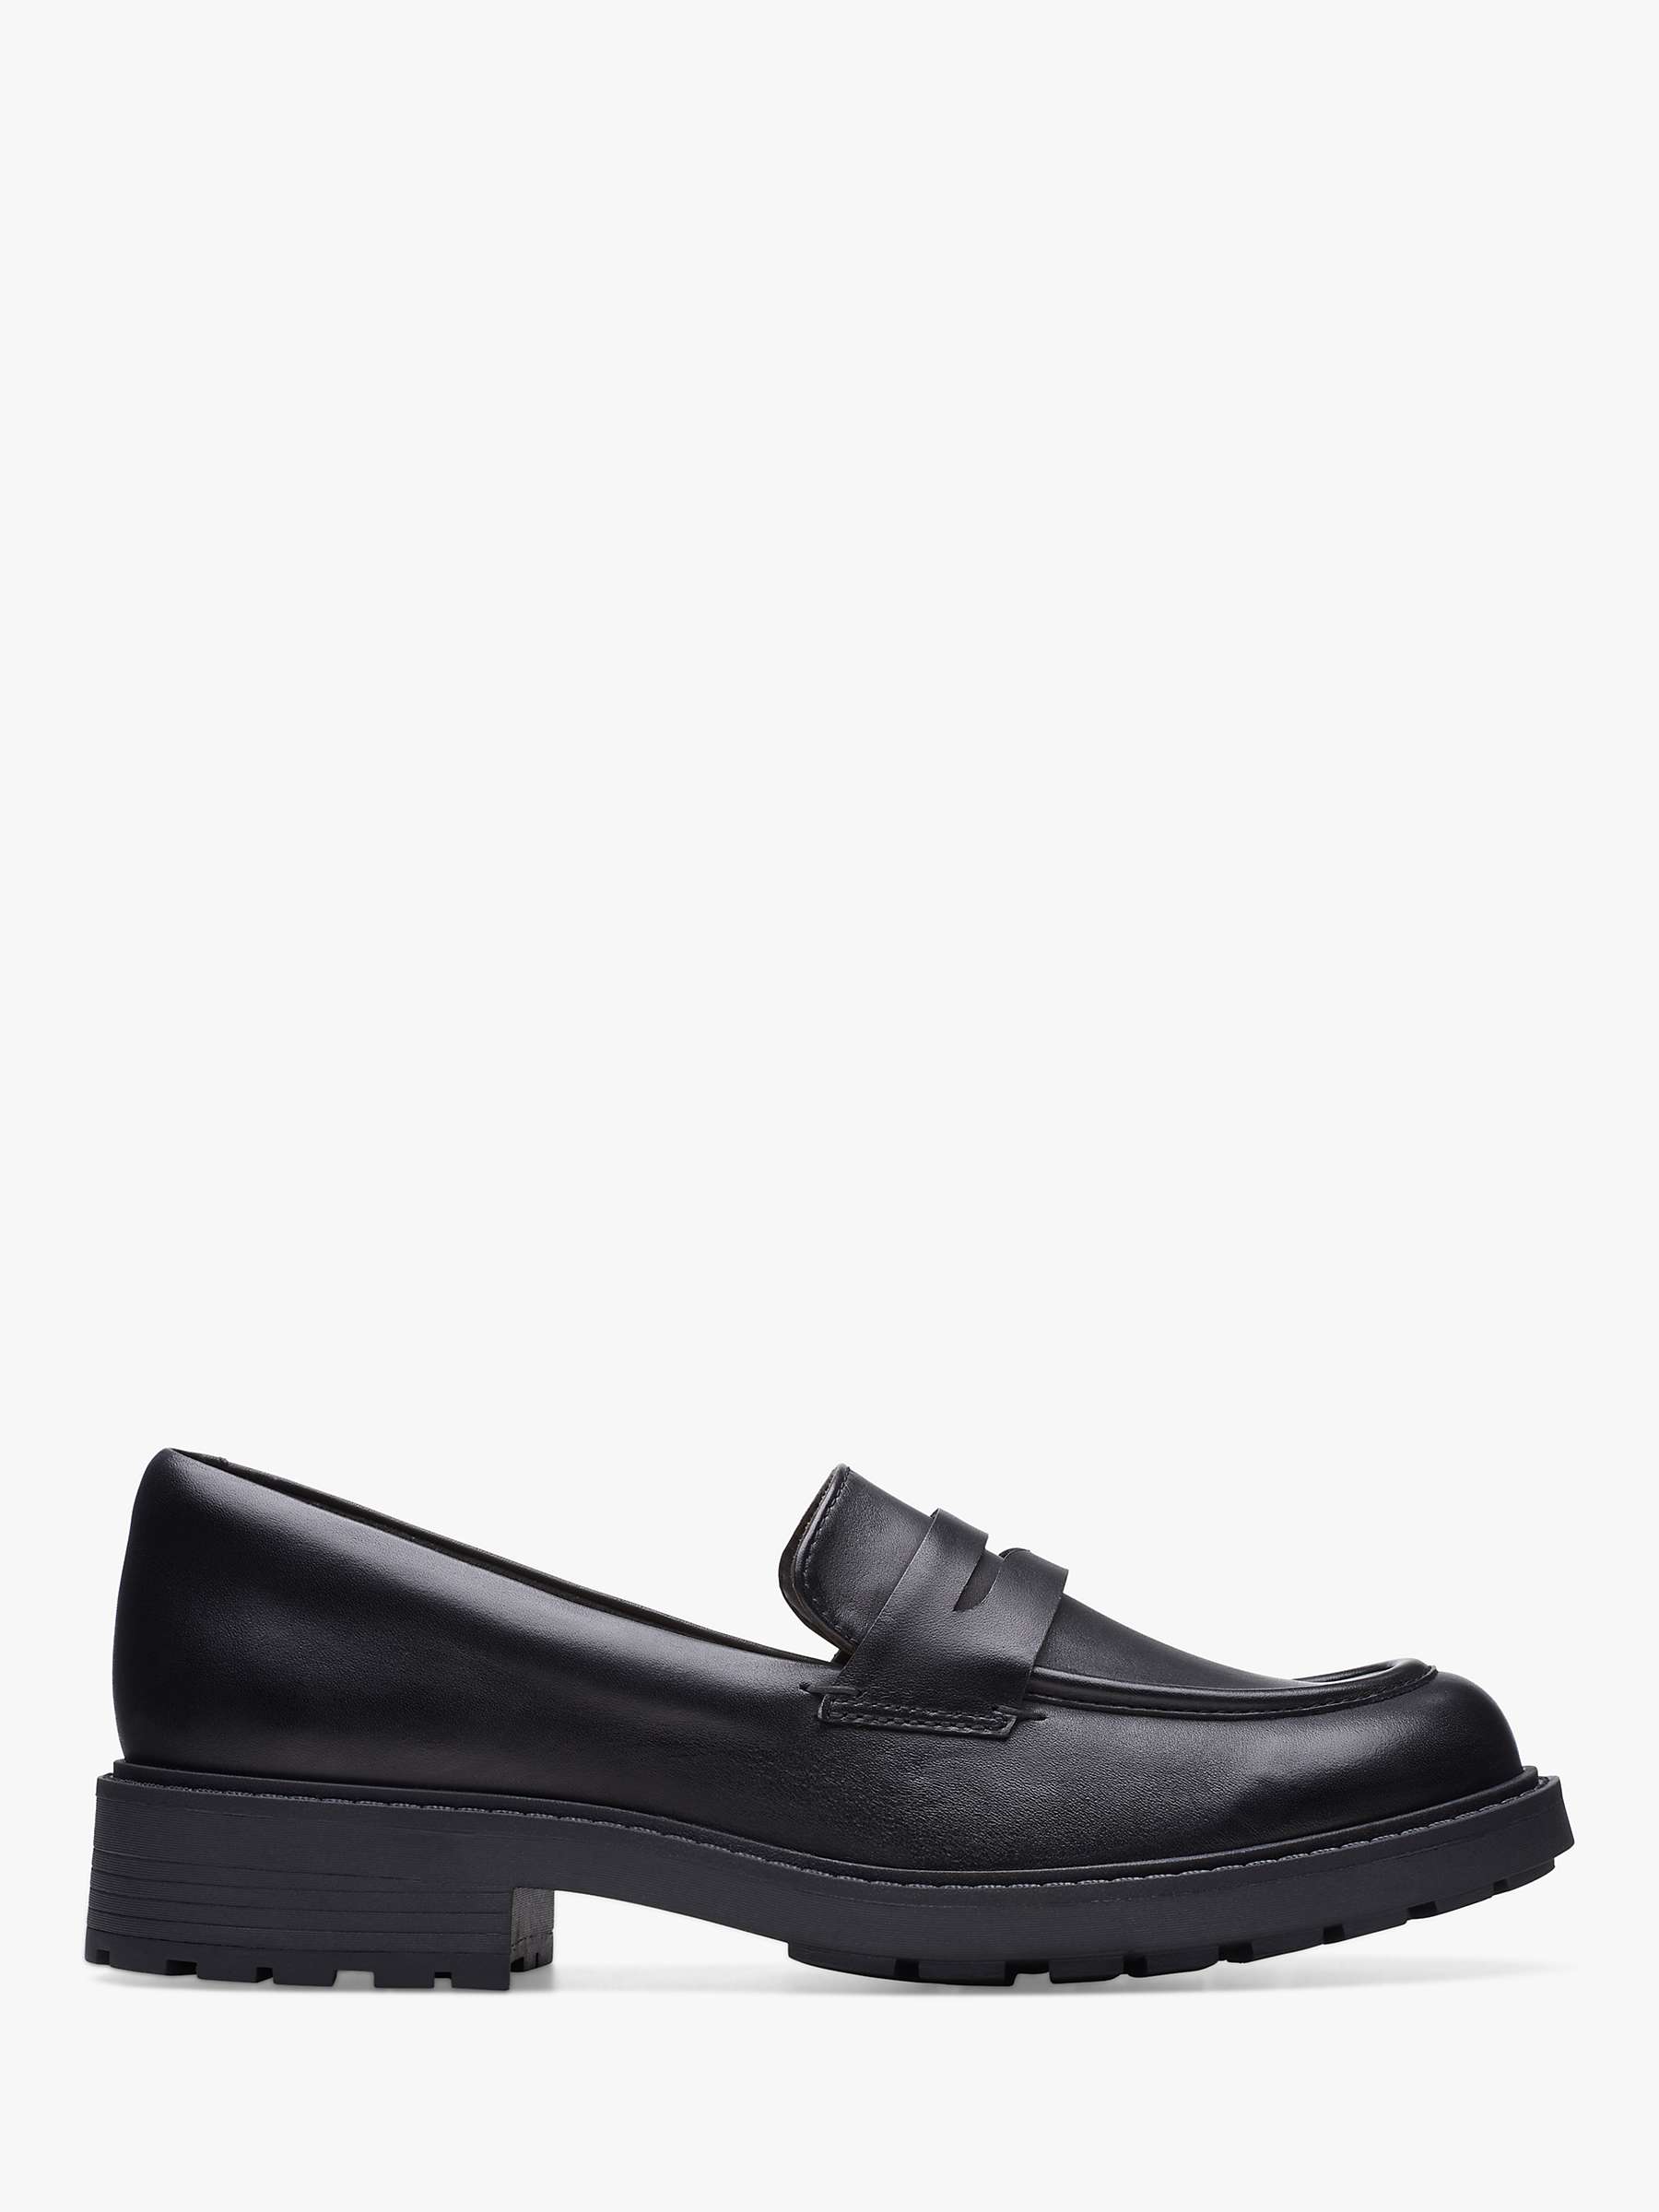 Buy Clarks Orinoco 2 Penny Leather Loafers, Black Online at johnlewis.com